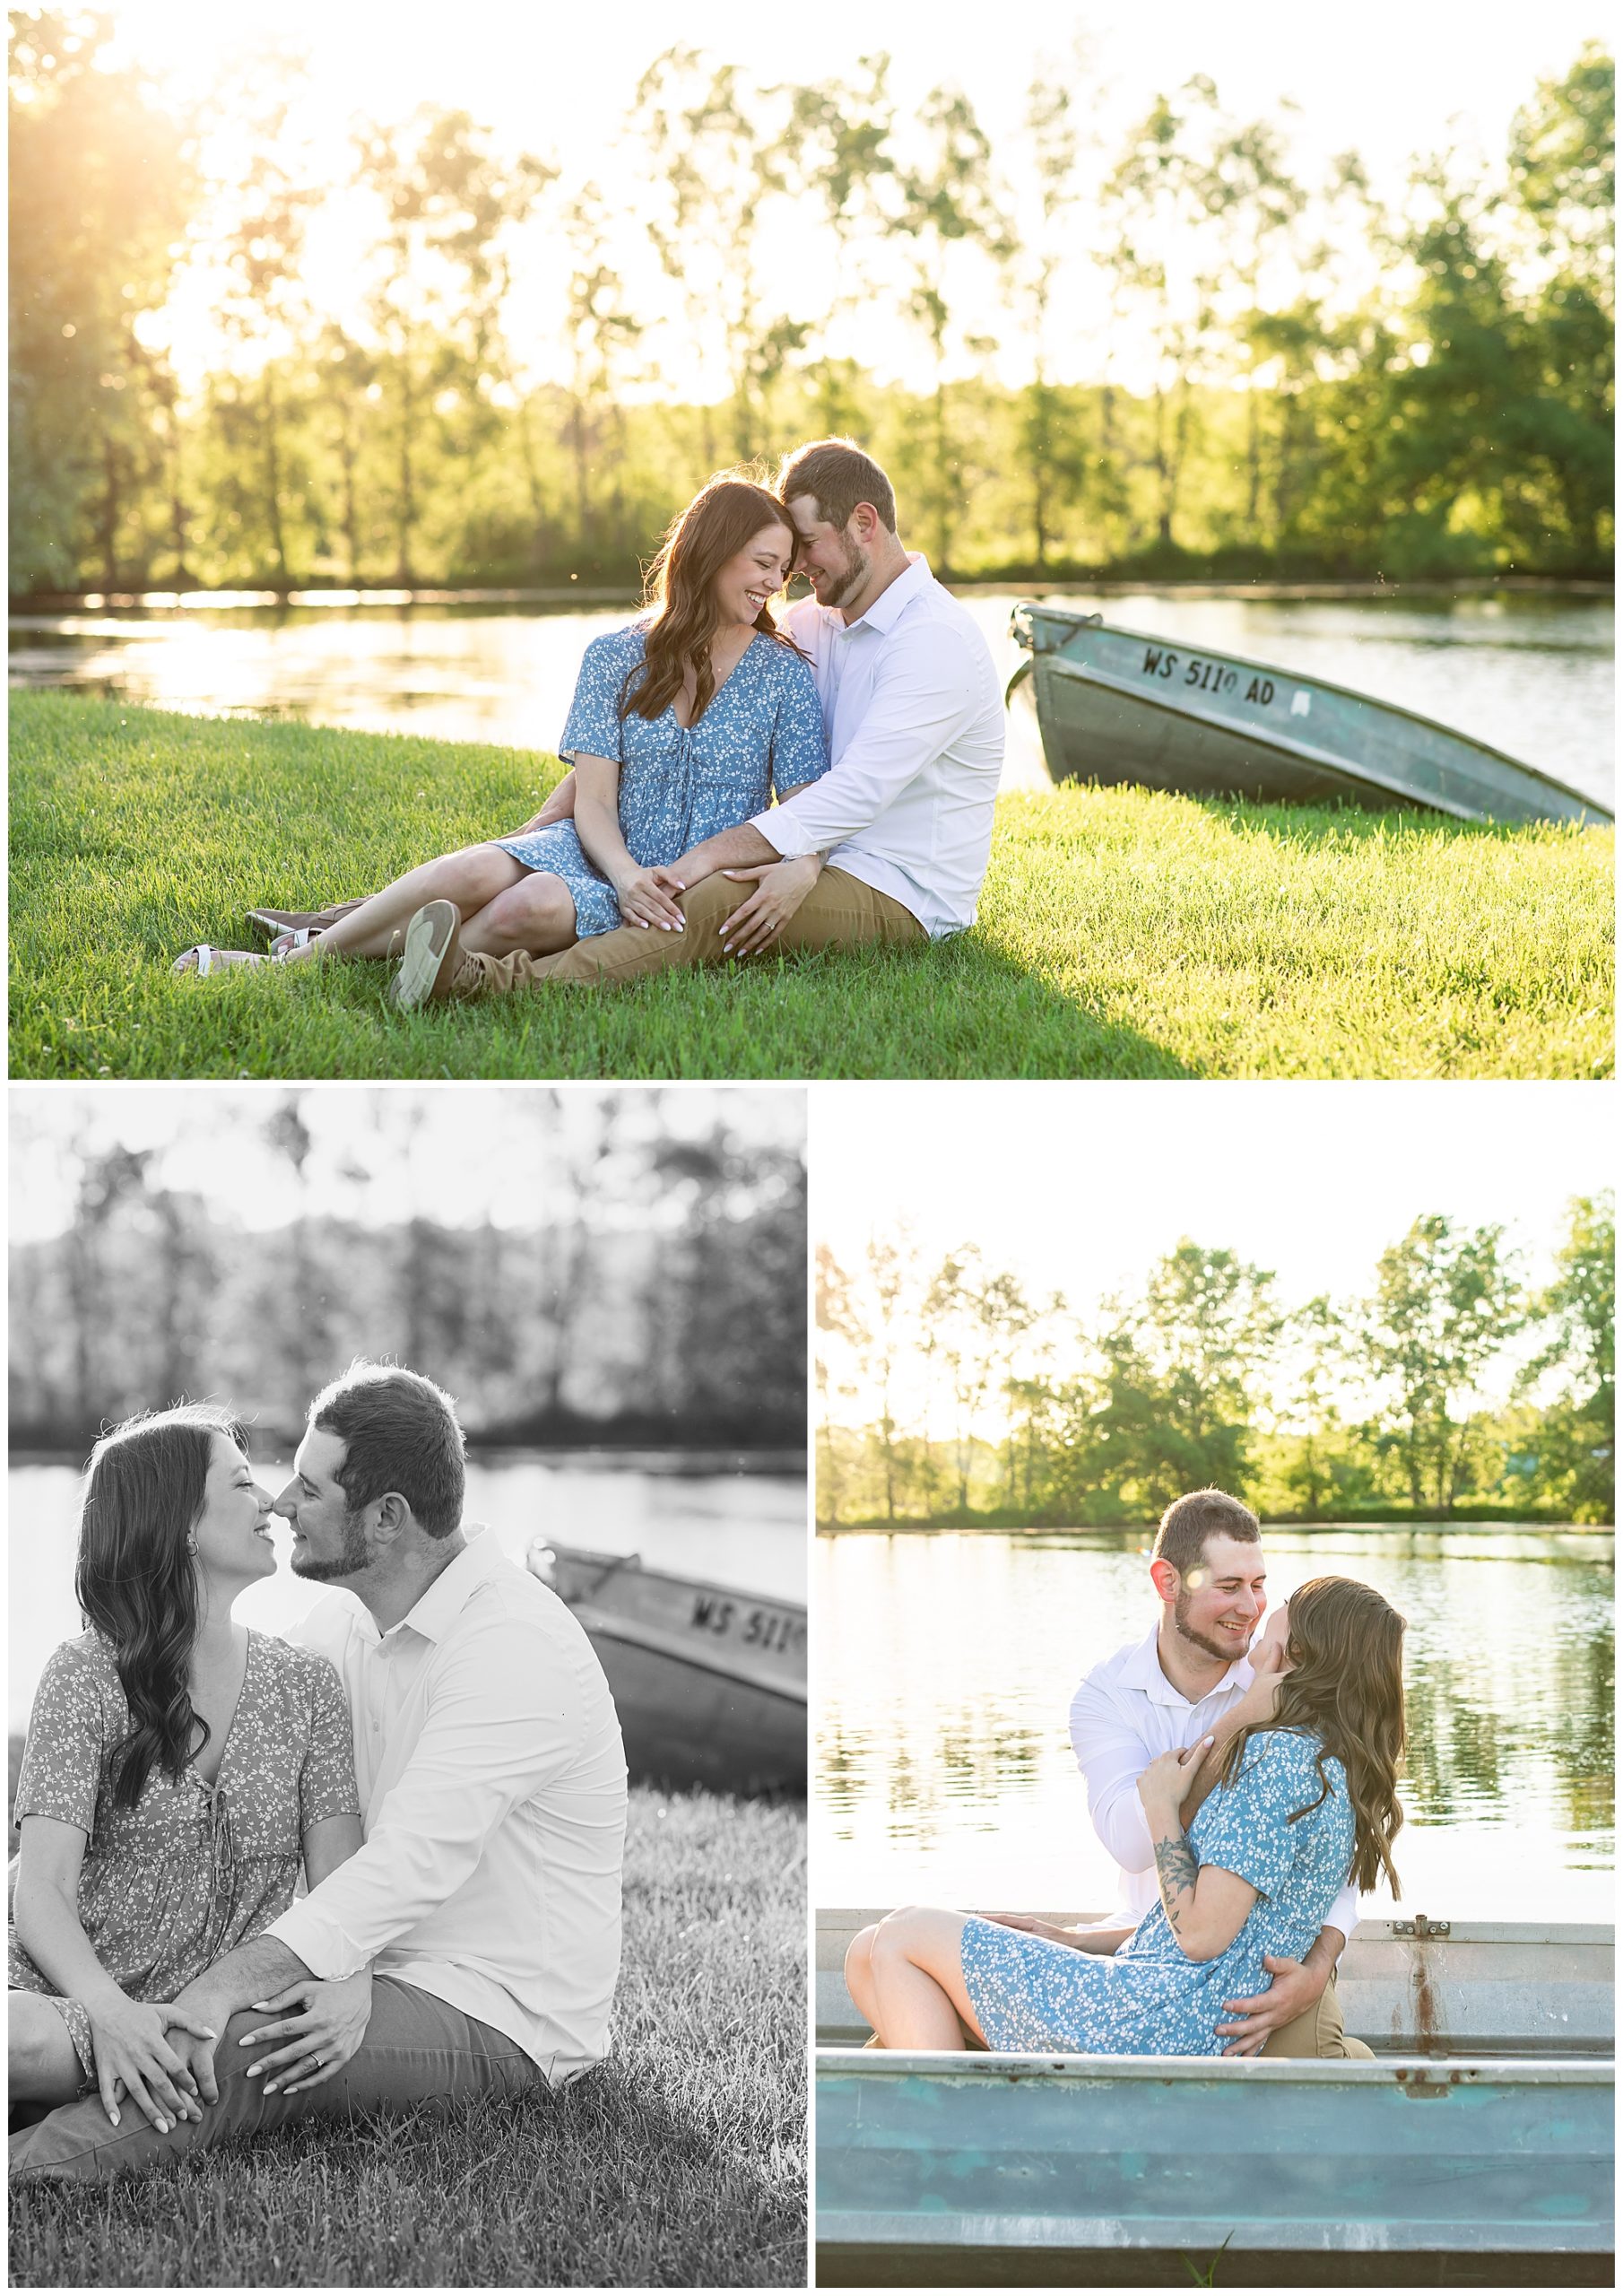 Pioneer Creek Farm Engagement Session near PaddleBoat with Kuffel Photography